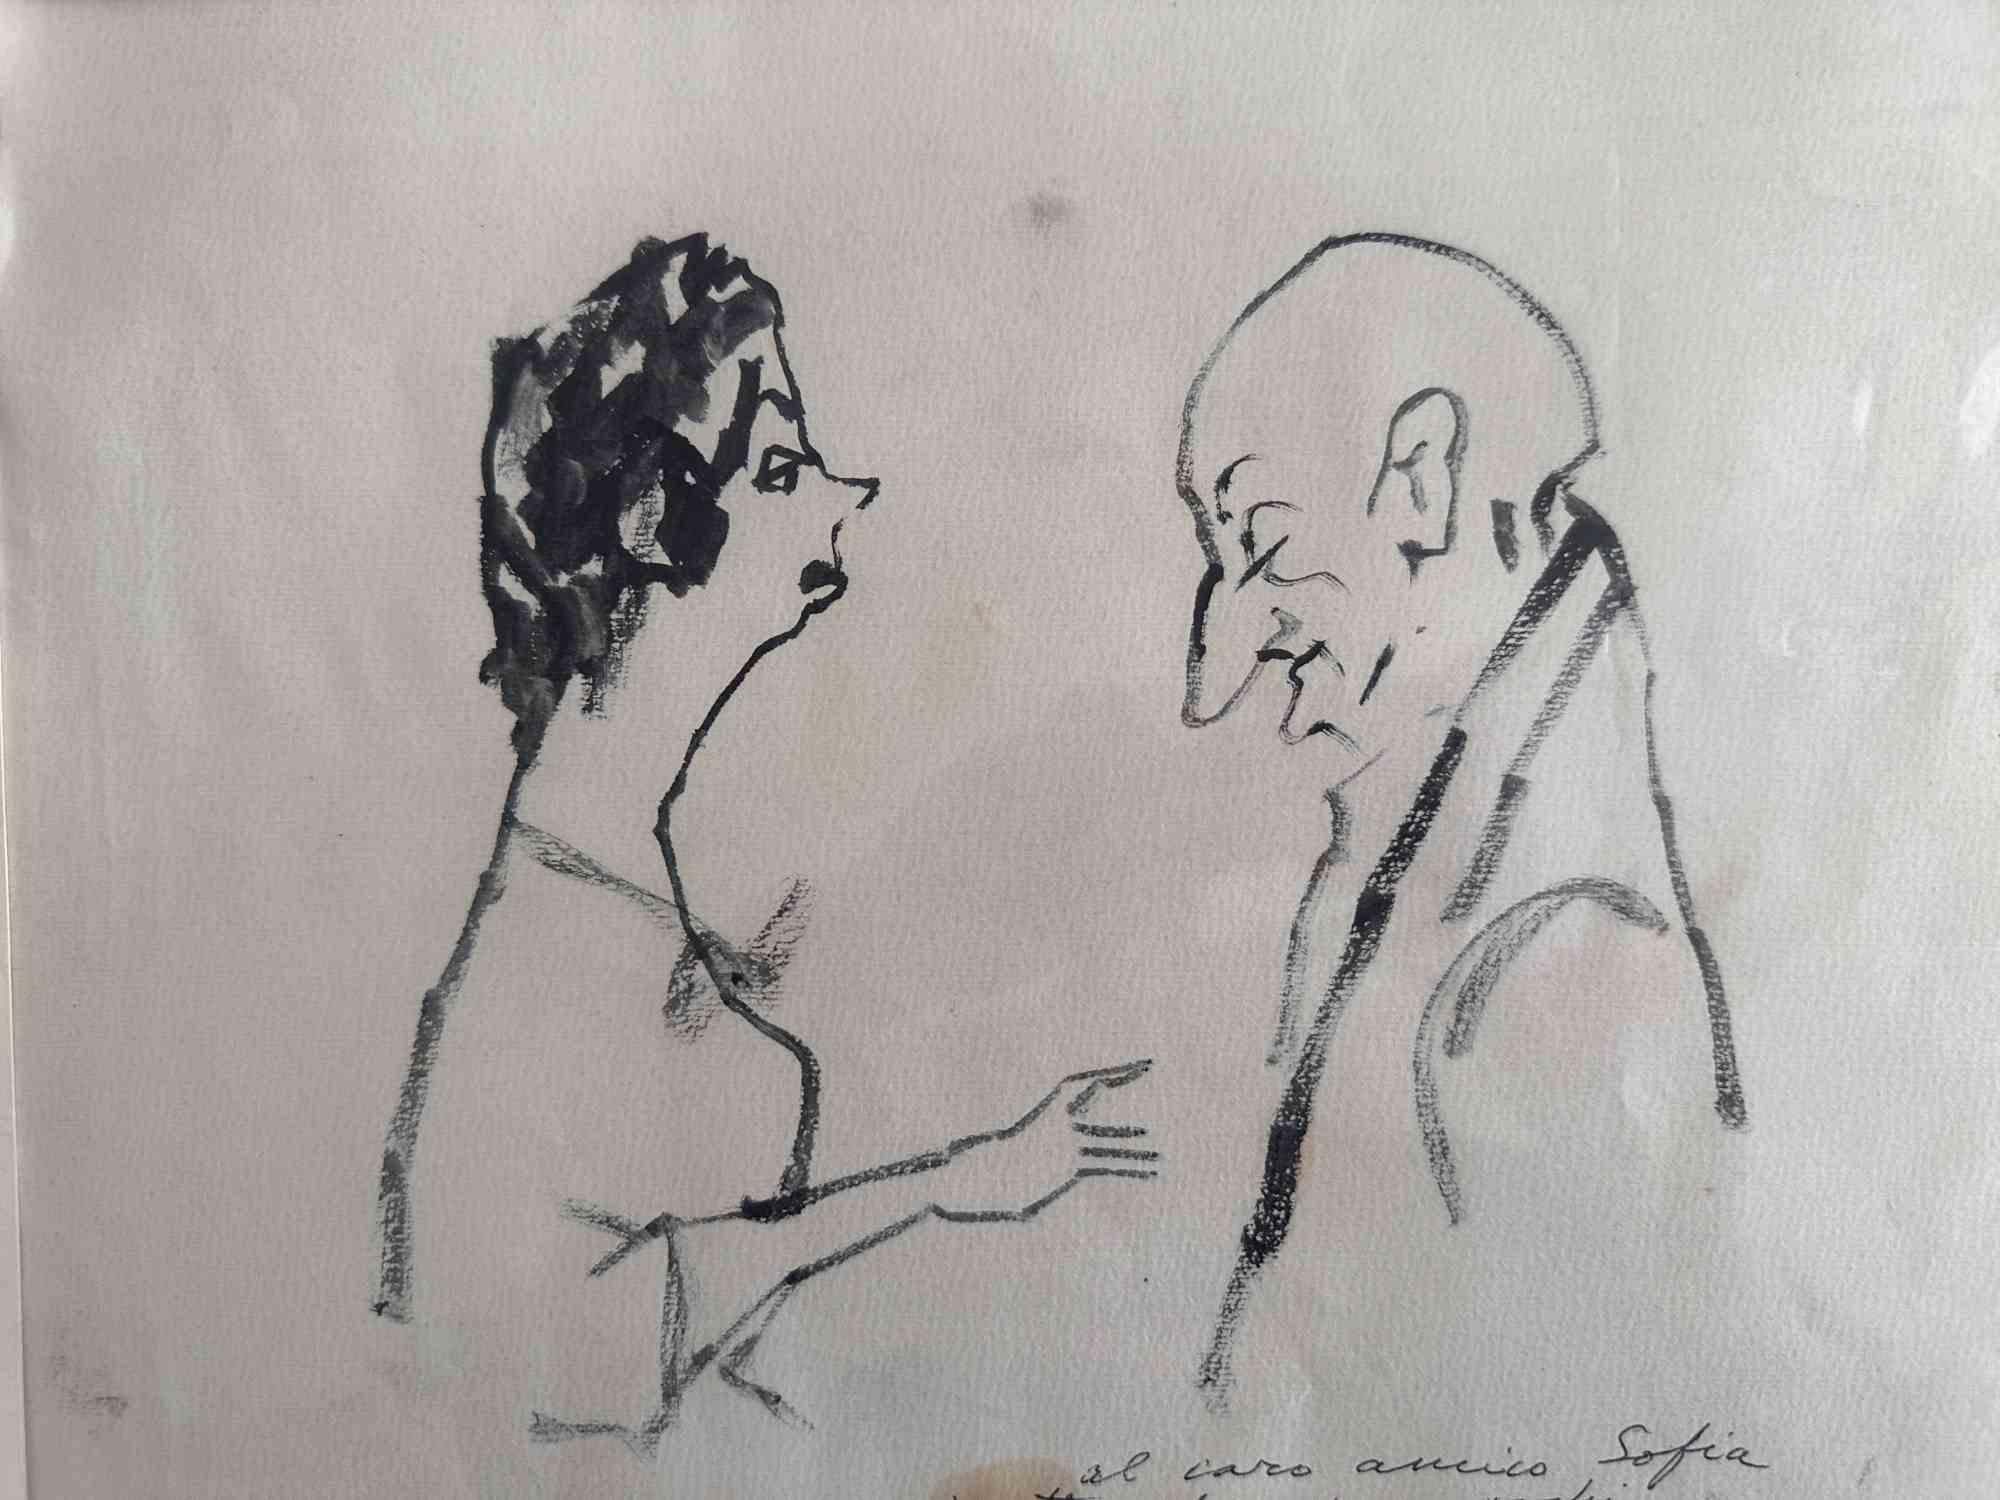 Rough Conversation is a drawing Artwork realized by  (1924-1989) in the 1960s.

Hand-signed and dedicated to Corrado Sofia.

Good conditions with slight foxing and folding.

Mino Maccari (Siena, 1924-Rome, June 16, 1989) was an Italian writer,